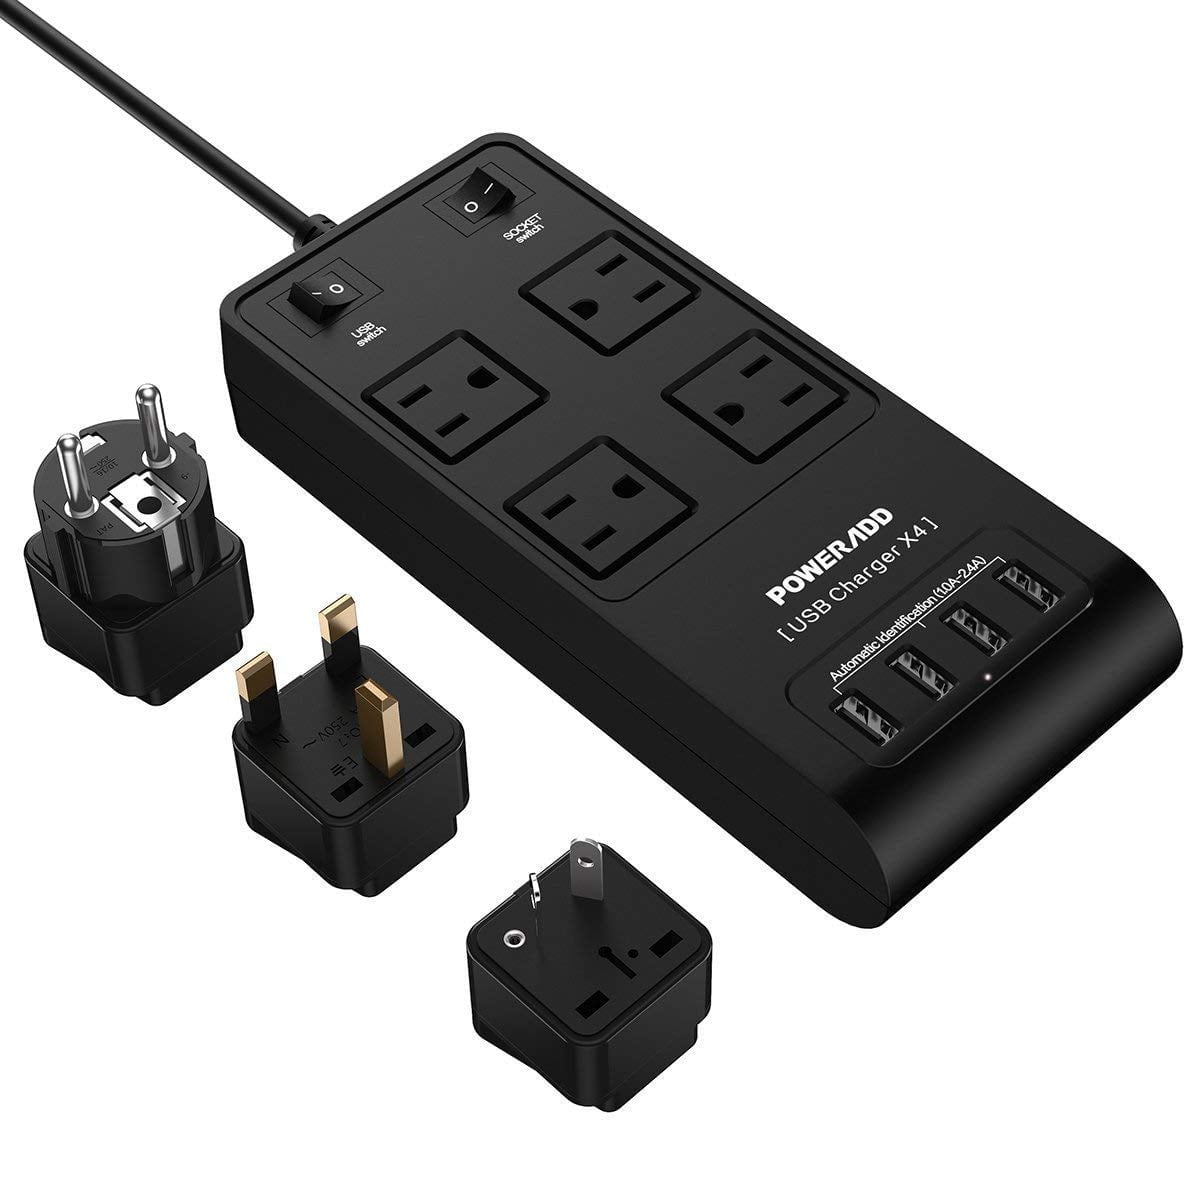 FDN Life Magazine - Power Surge Protector Outlet for Digital Nomad, Freelancer, Remote Worker or Location Independent - From Amazon.com